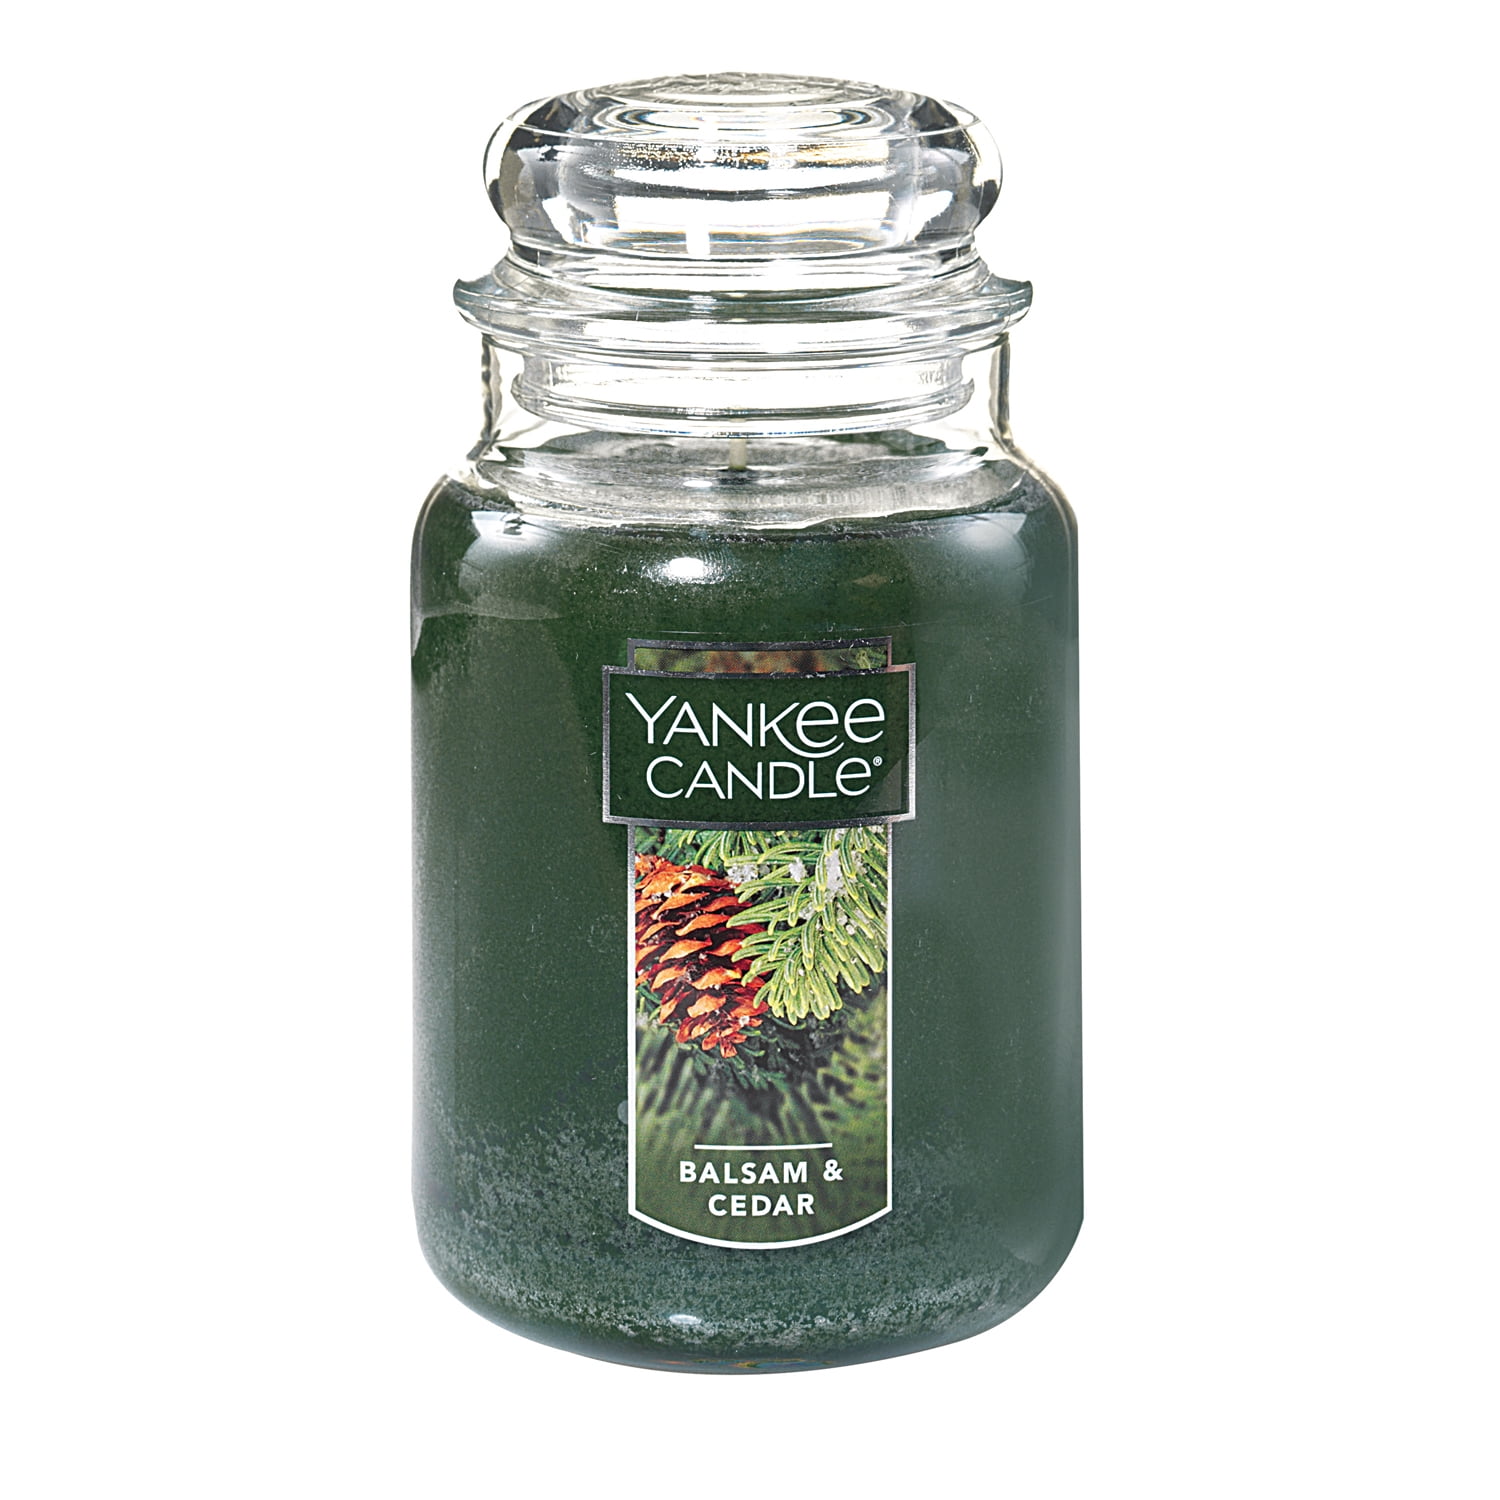 Yankee Candle Large Classic Scented Jar Candle Sage 623 g 110-150 hrs burn time 